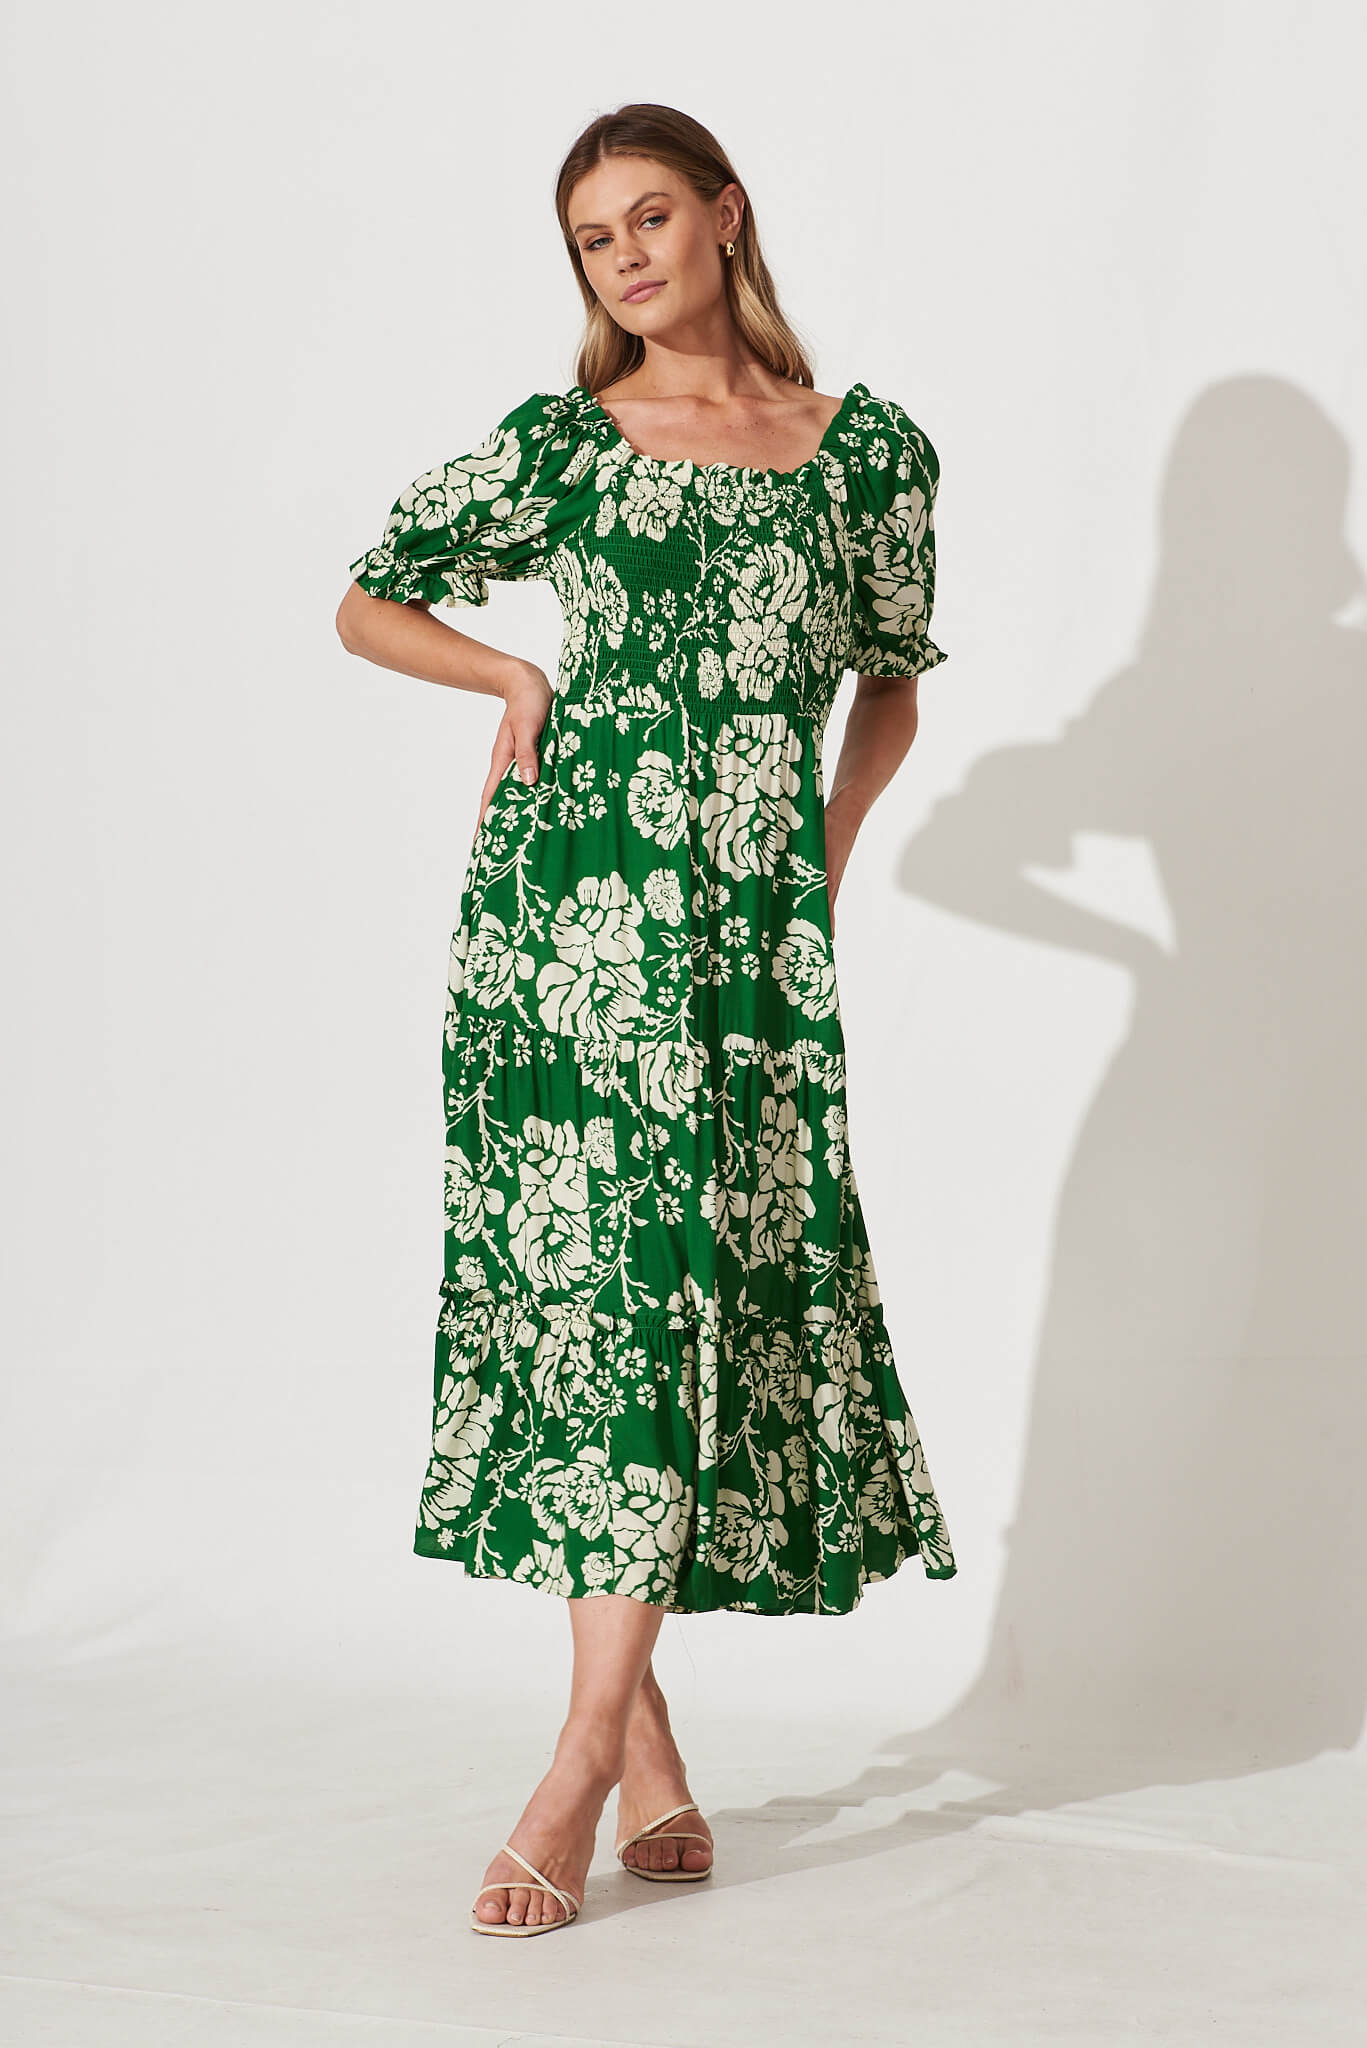 Hotel California Midi Dress In Green With White Floral - full length